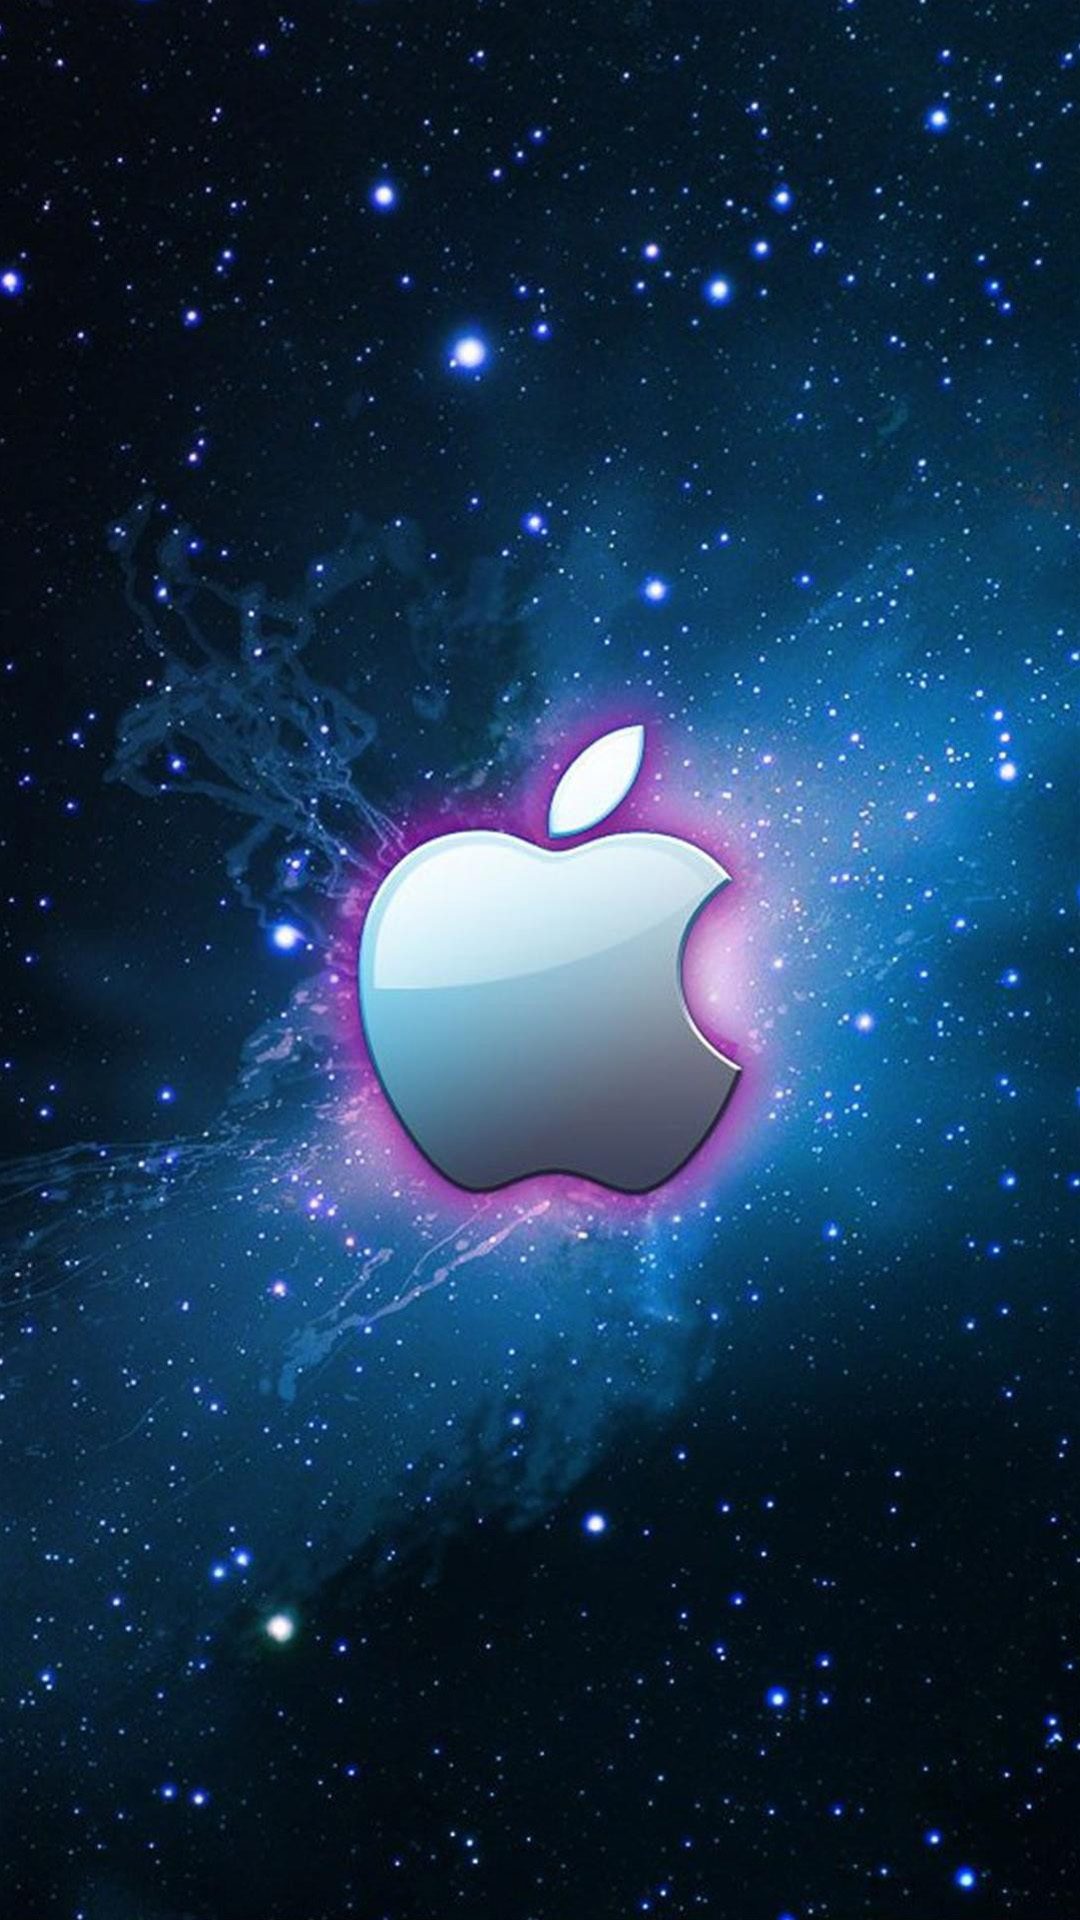 Free Download Apple Galaxy Wallpaper Sf Wallpaper 1080x19 For Your Desktop Mobile Tablet Explore 28 Macbook Galaxy Background Macbook Galaxy Wallpaper Macbook Galaxy Background Macbook Background